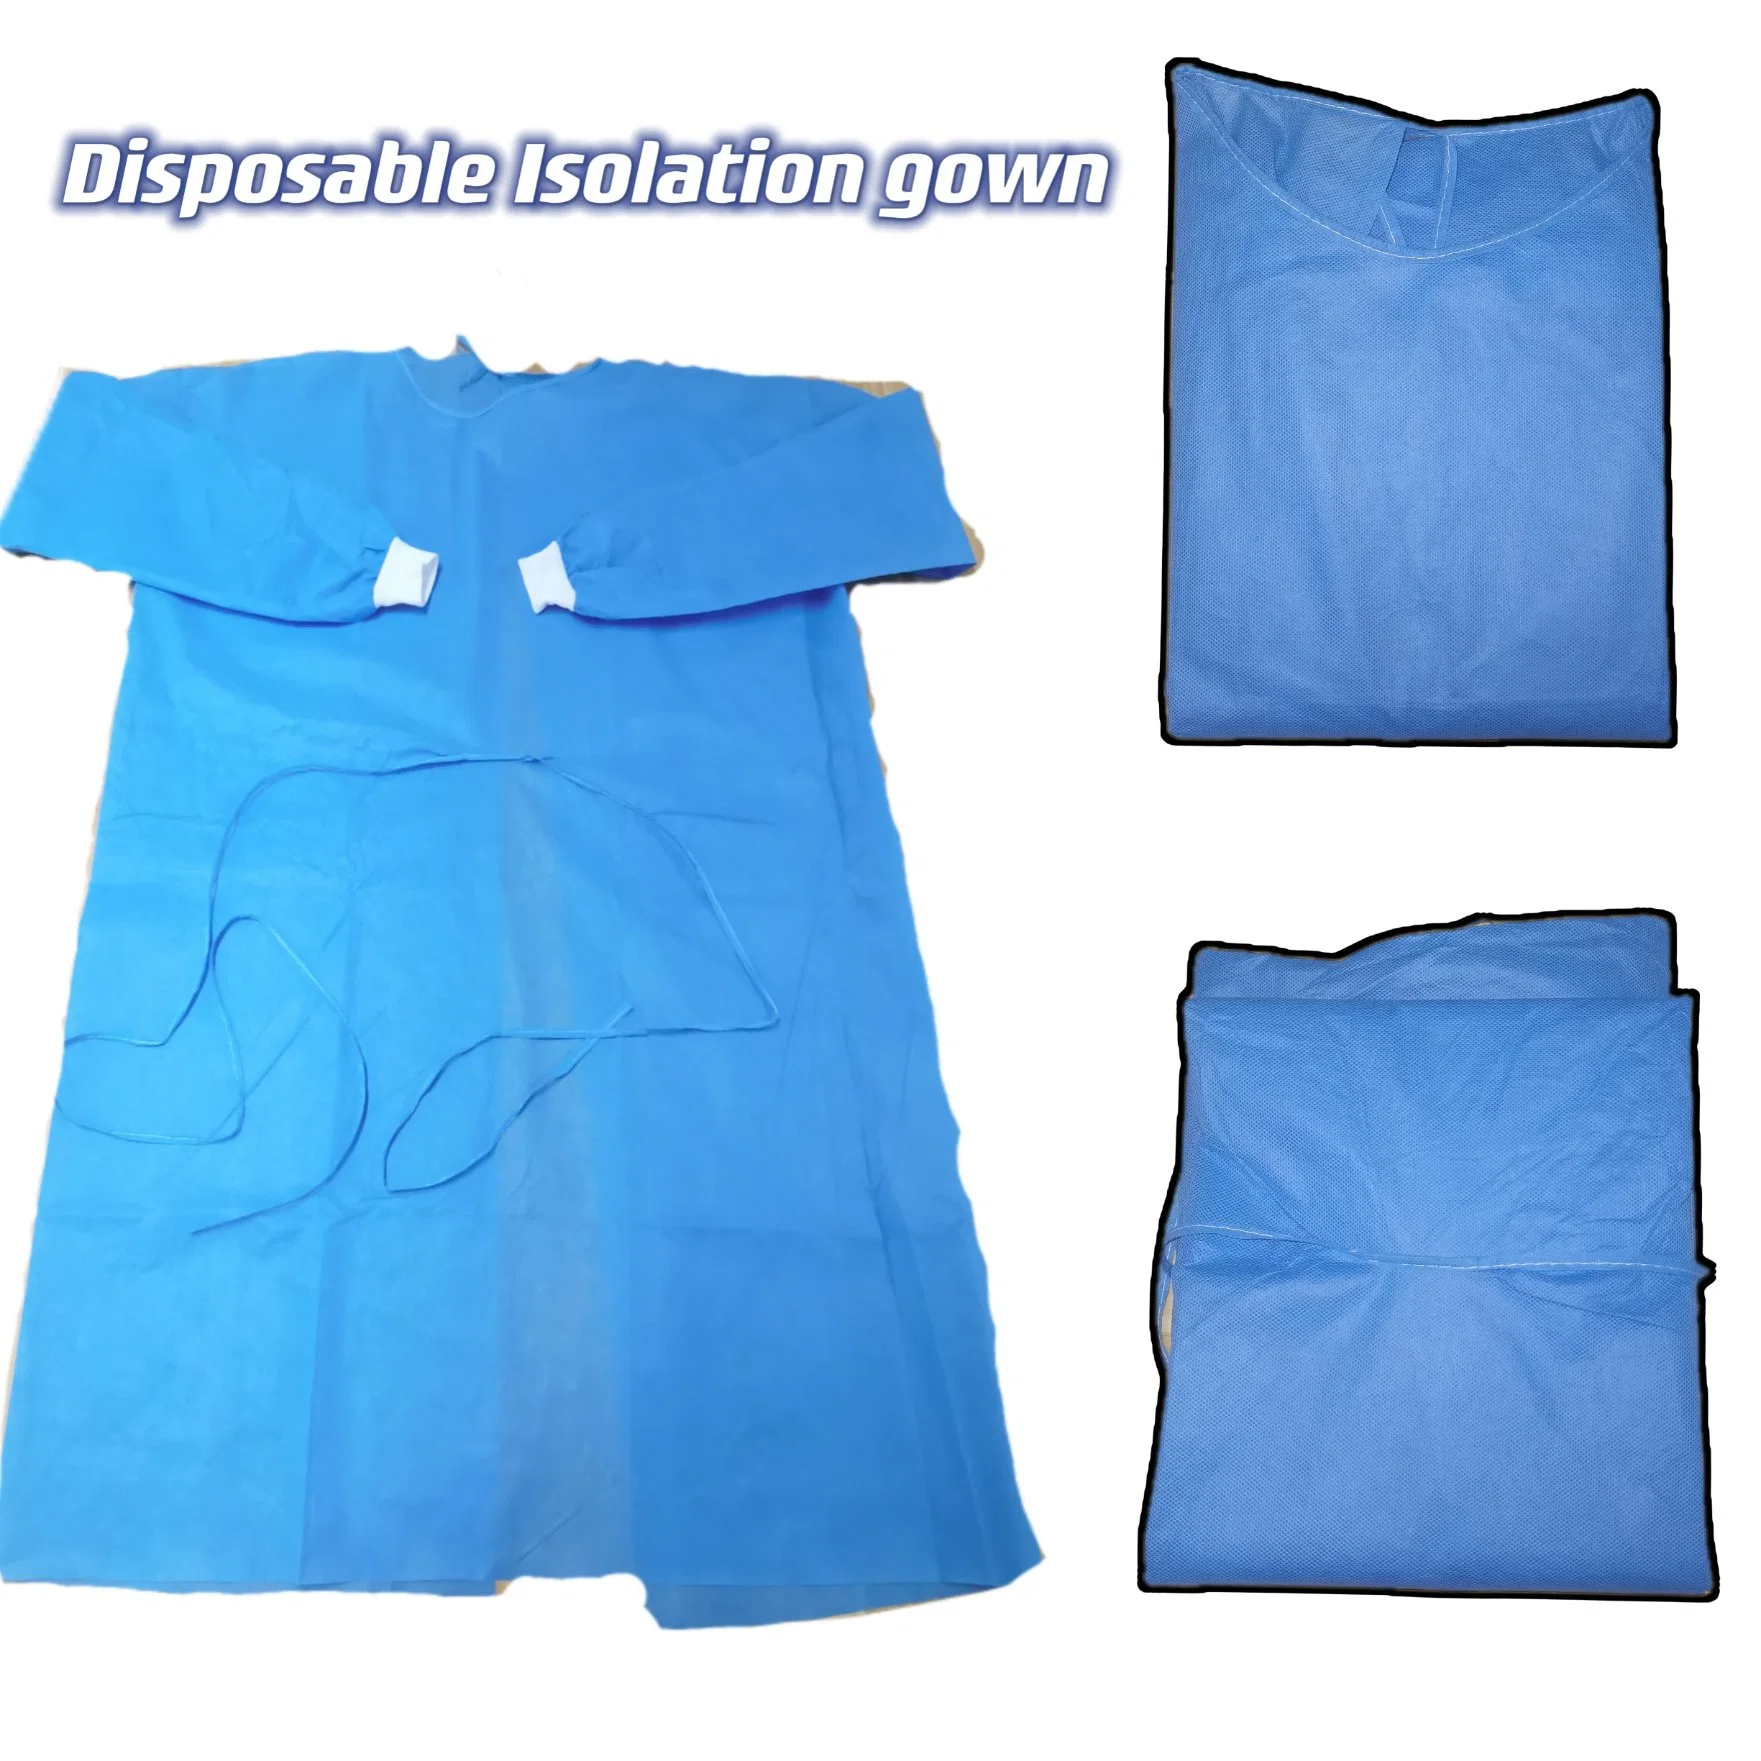 Wholesale SMS Non-Woven Disposable Isolation Gown Waterproof Soft Breathable Surgical Gown